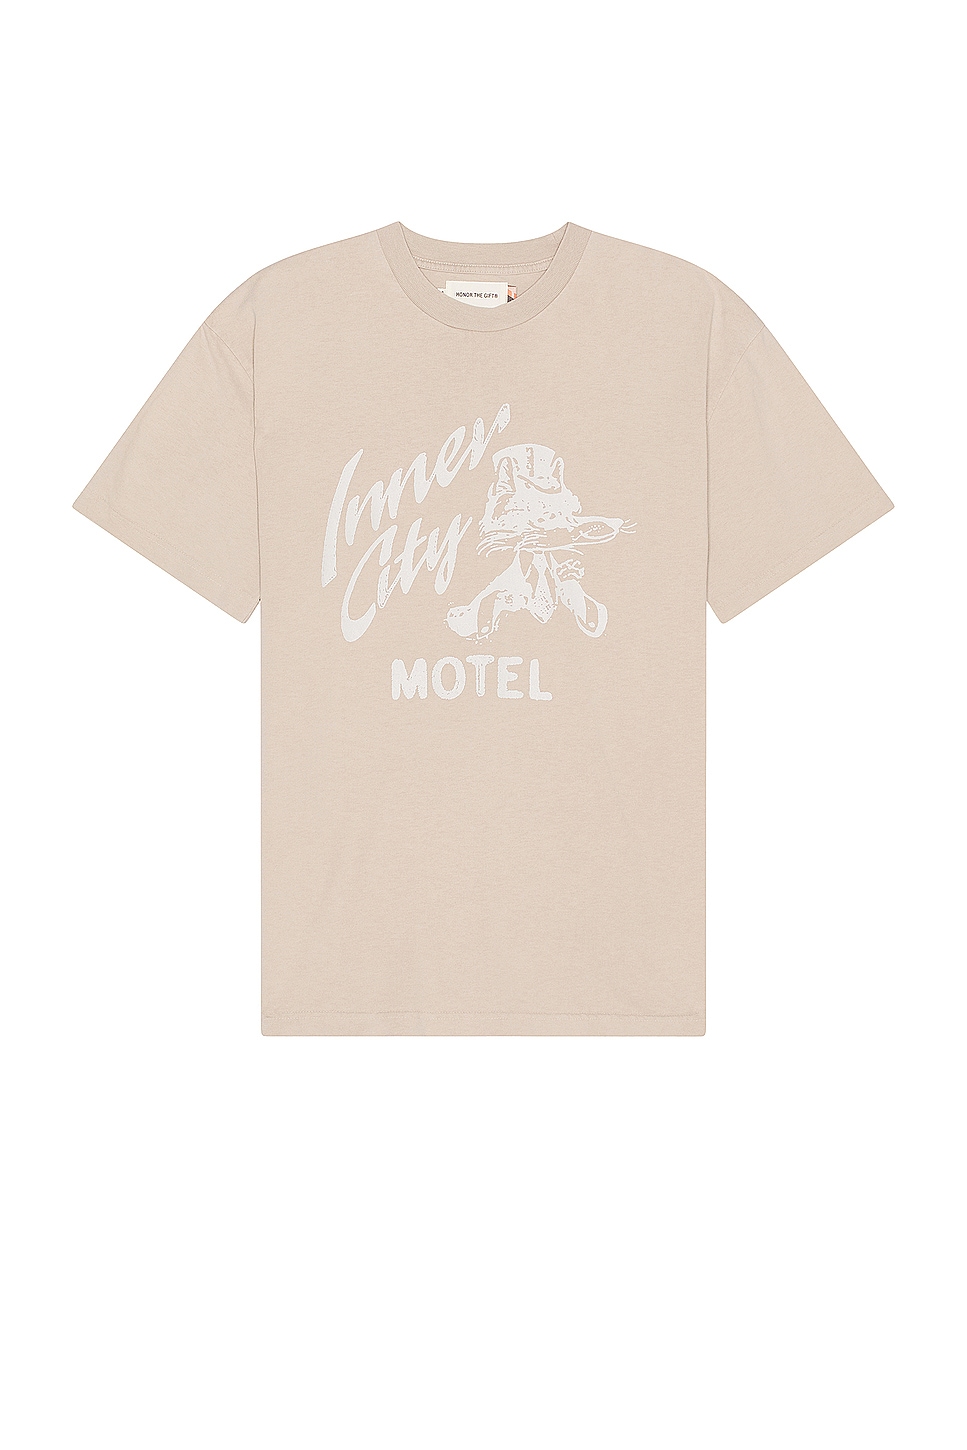 Image 1 of Honor The Gift Inner City Motel Short Sleeve Tee in Brown